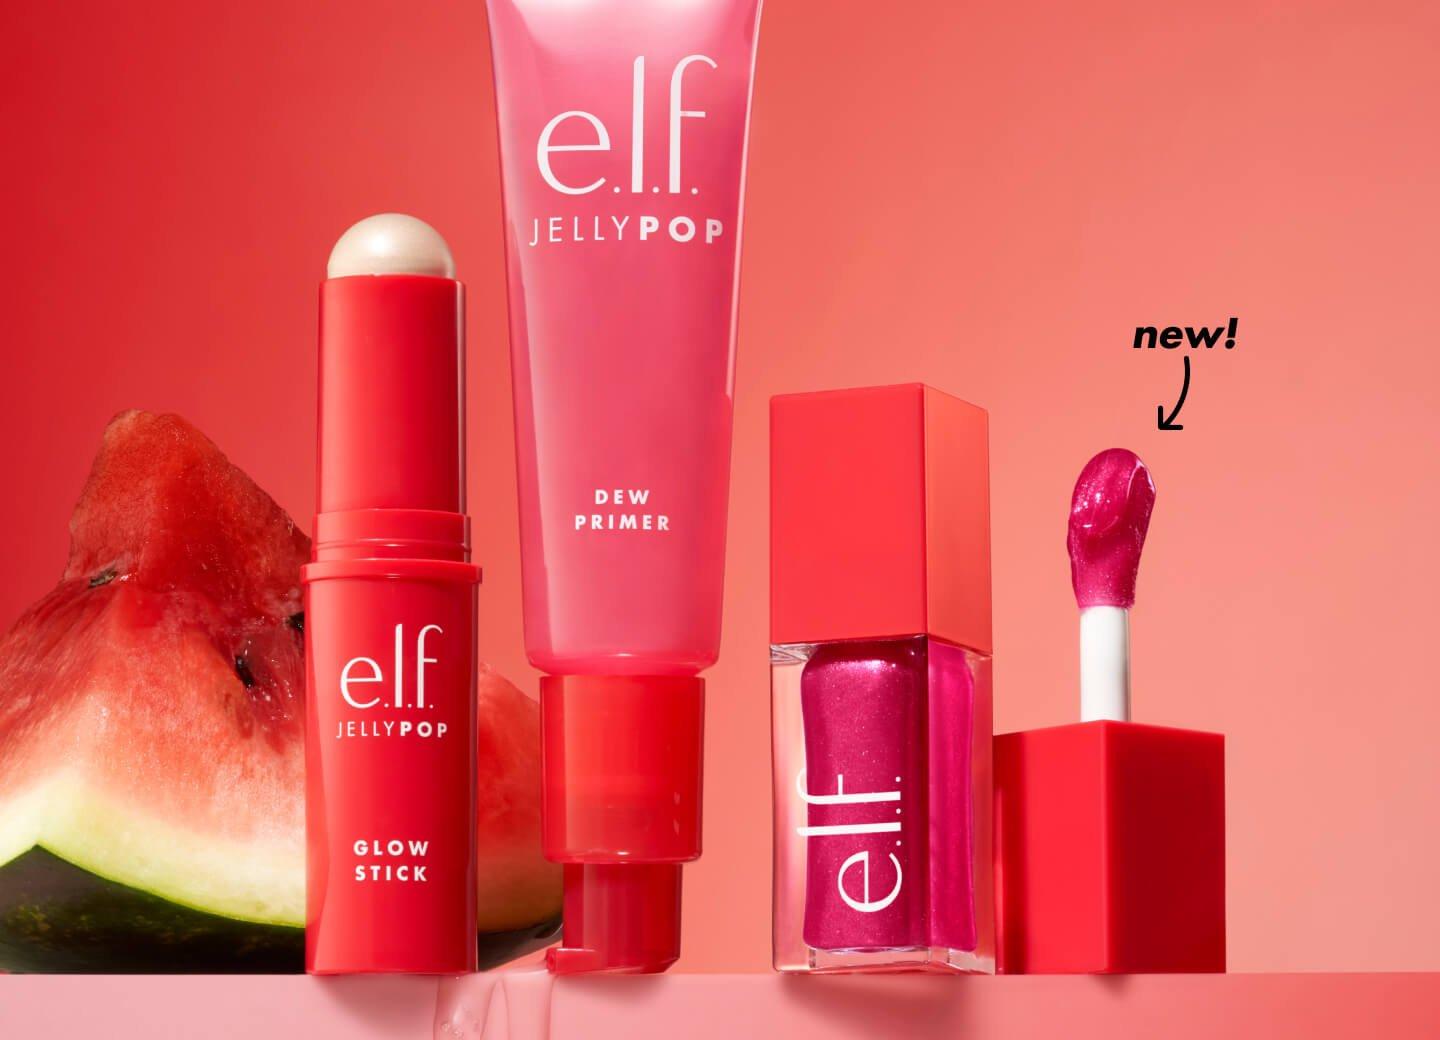 e.l.f. Jelly Pop products